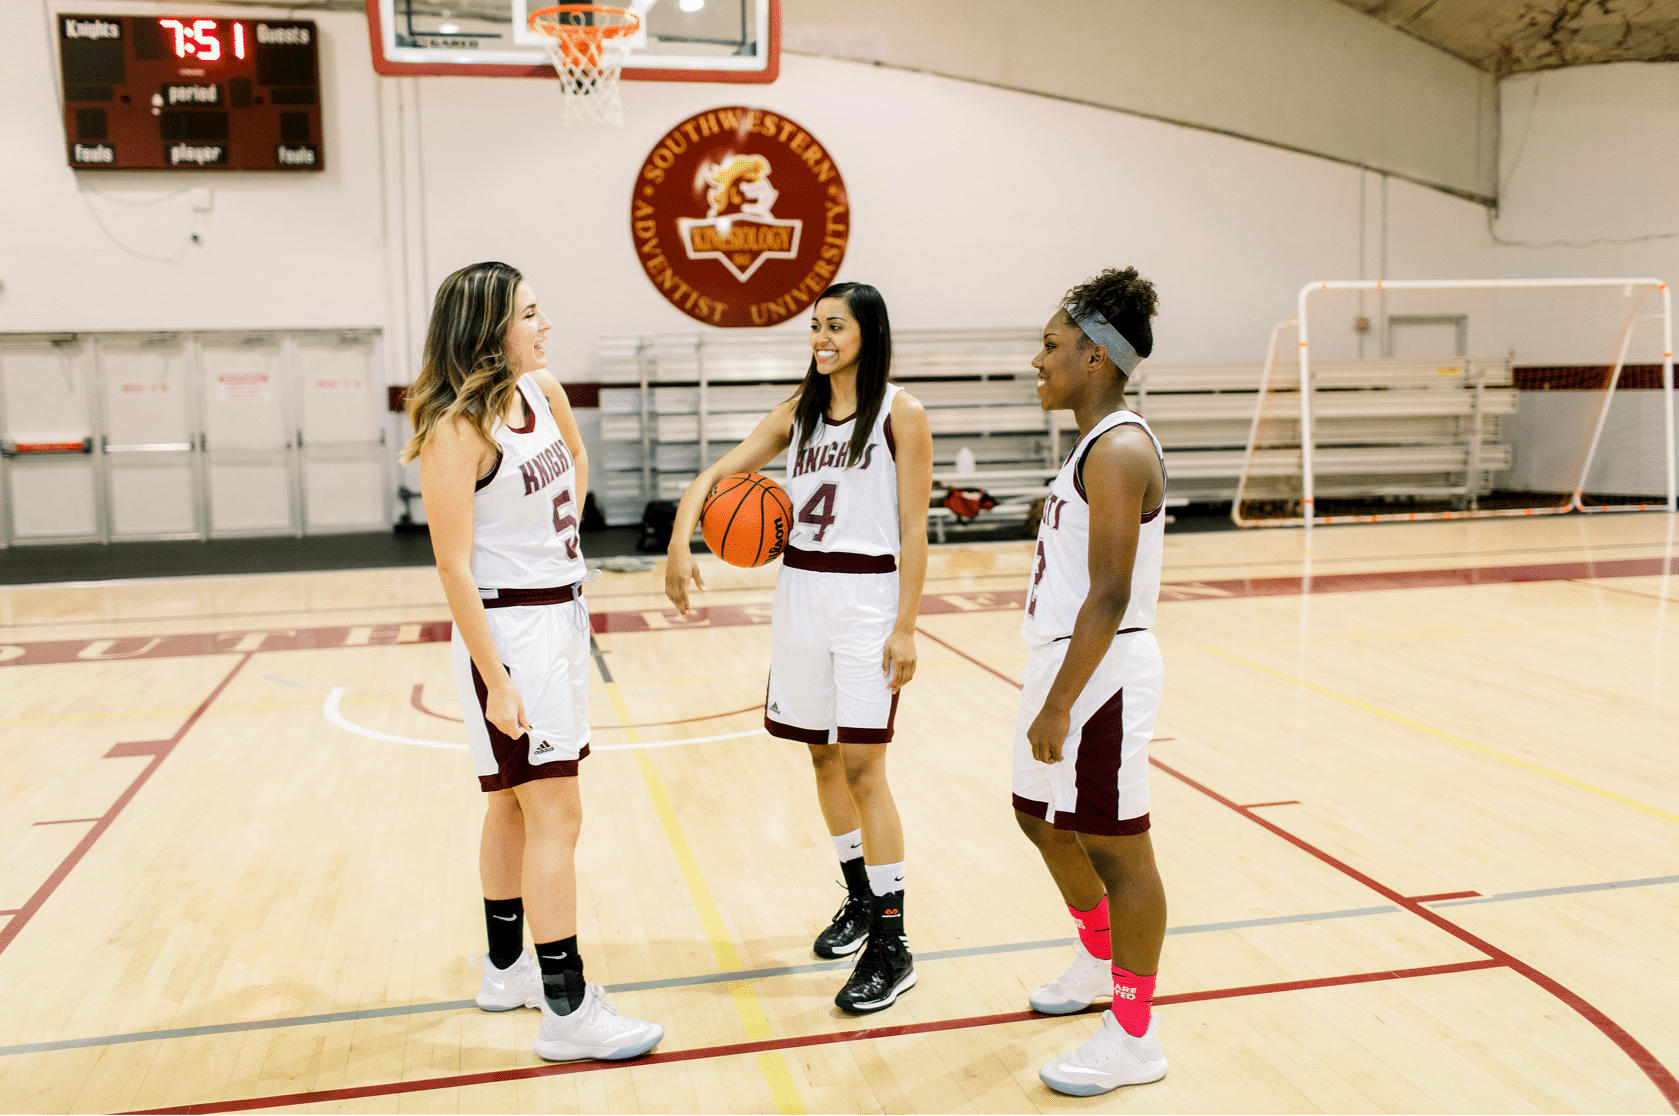 Three female basketball players in uniform stand talking together at the gymnasium, one holds a basketball